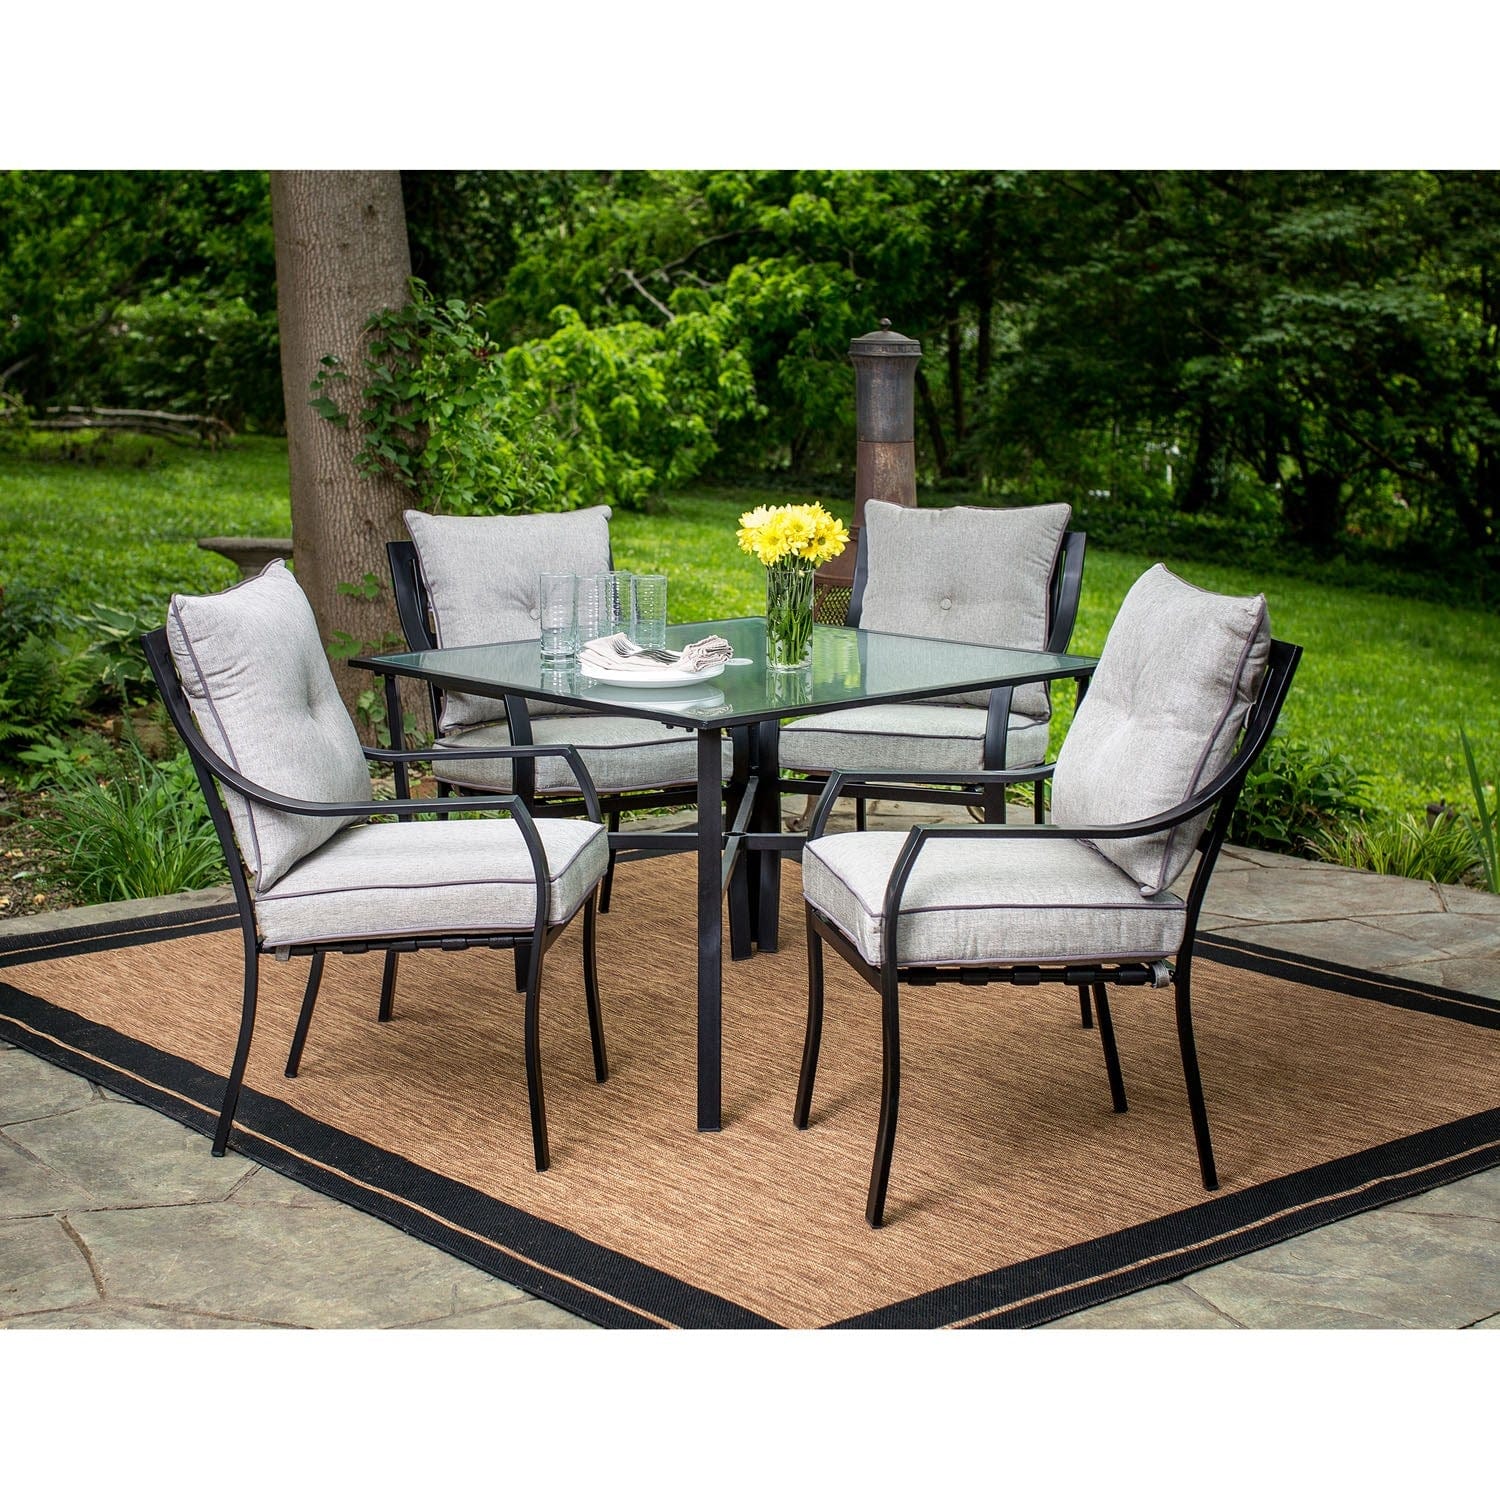 Hanover Outdoor Dining Set Hanover Lavallette 5-Piece Dining Set | 4 Stationary Chairs | 1 Square Dining Table in Gray - LAVDN5PC-SLV